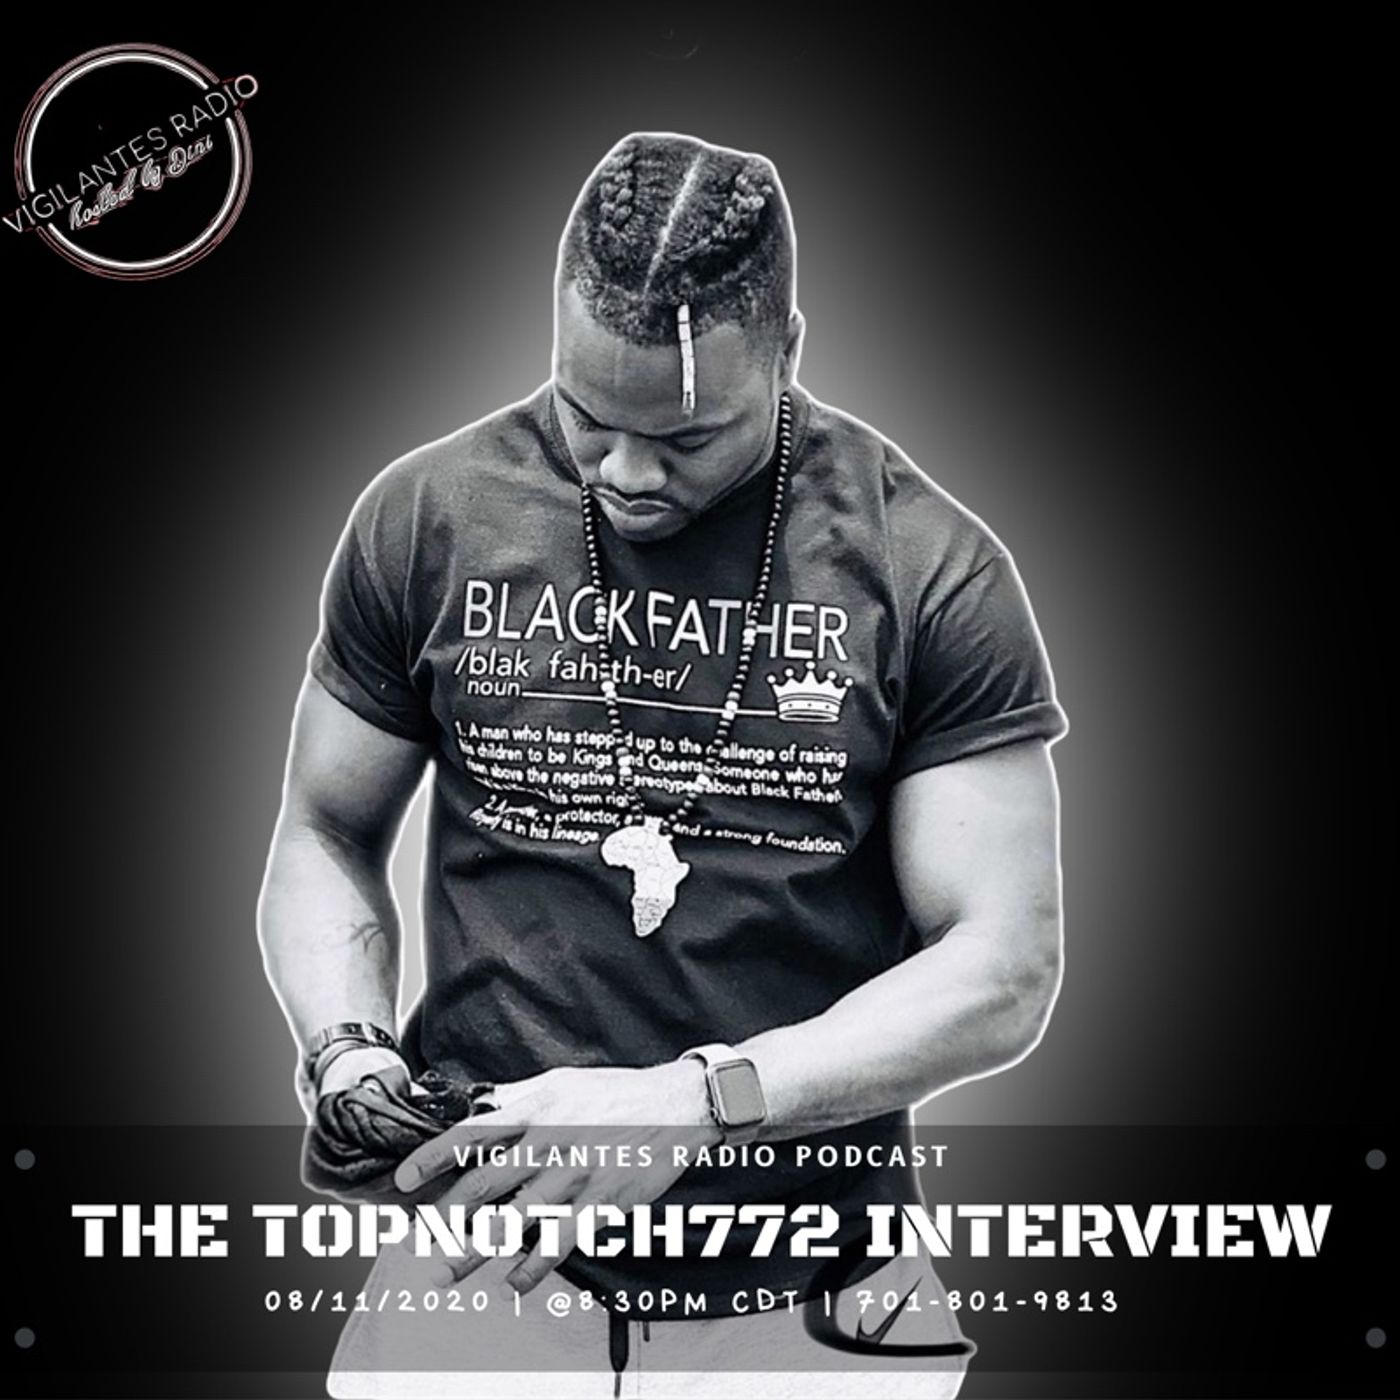 The TopNotch772 Interview. Image